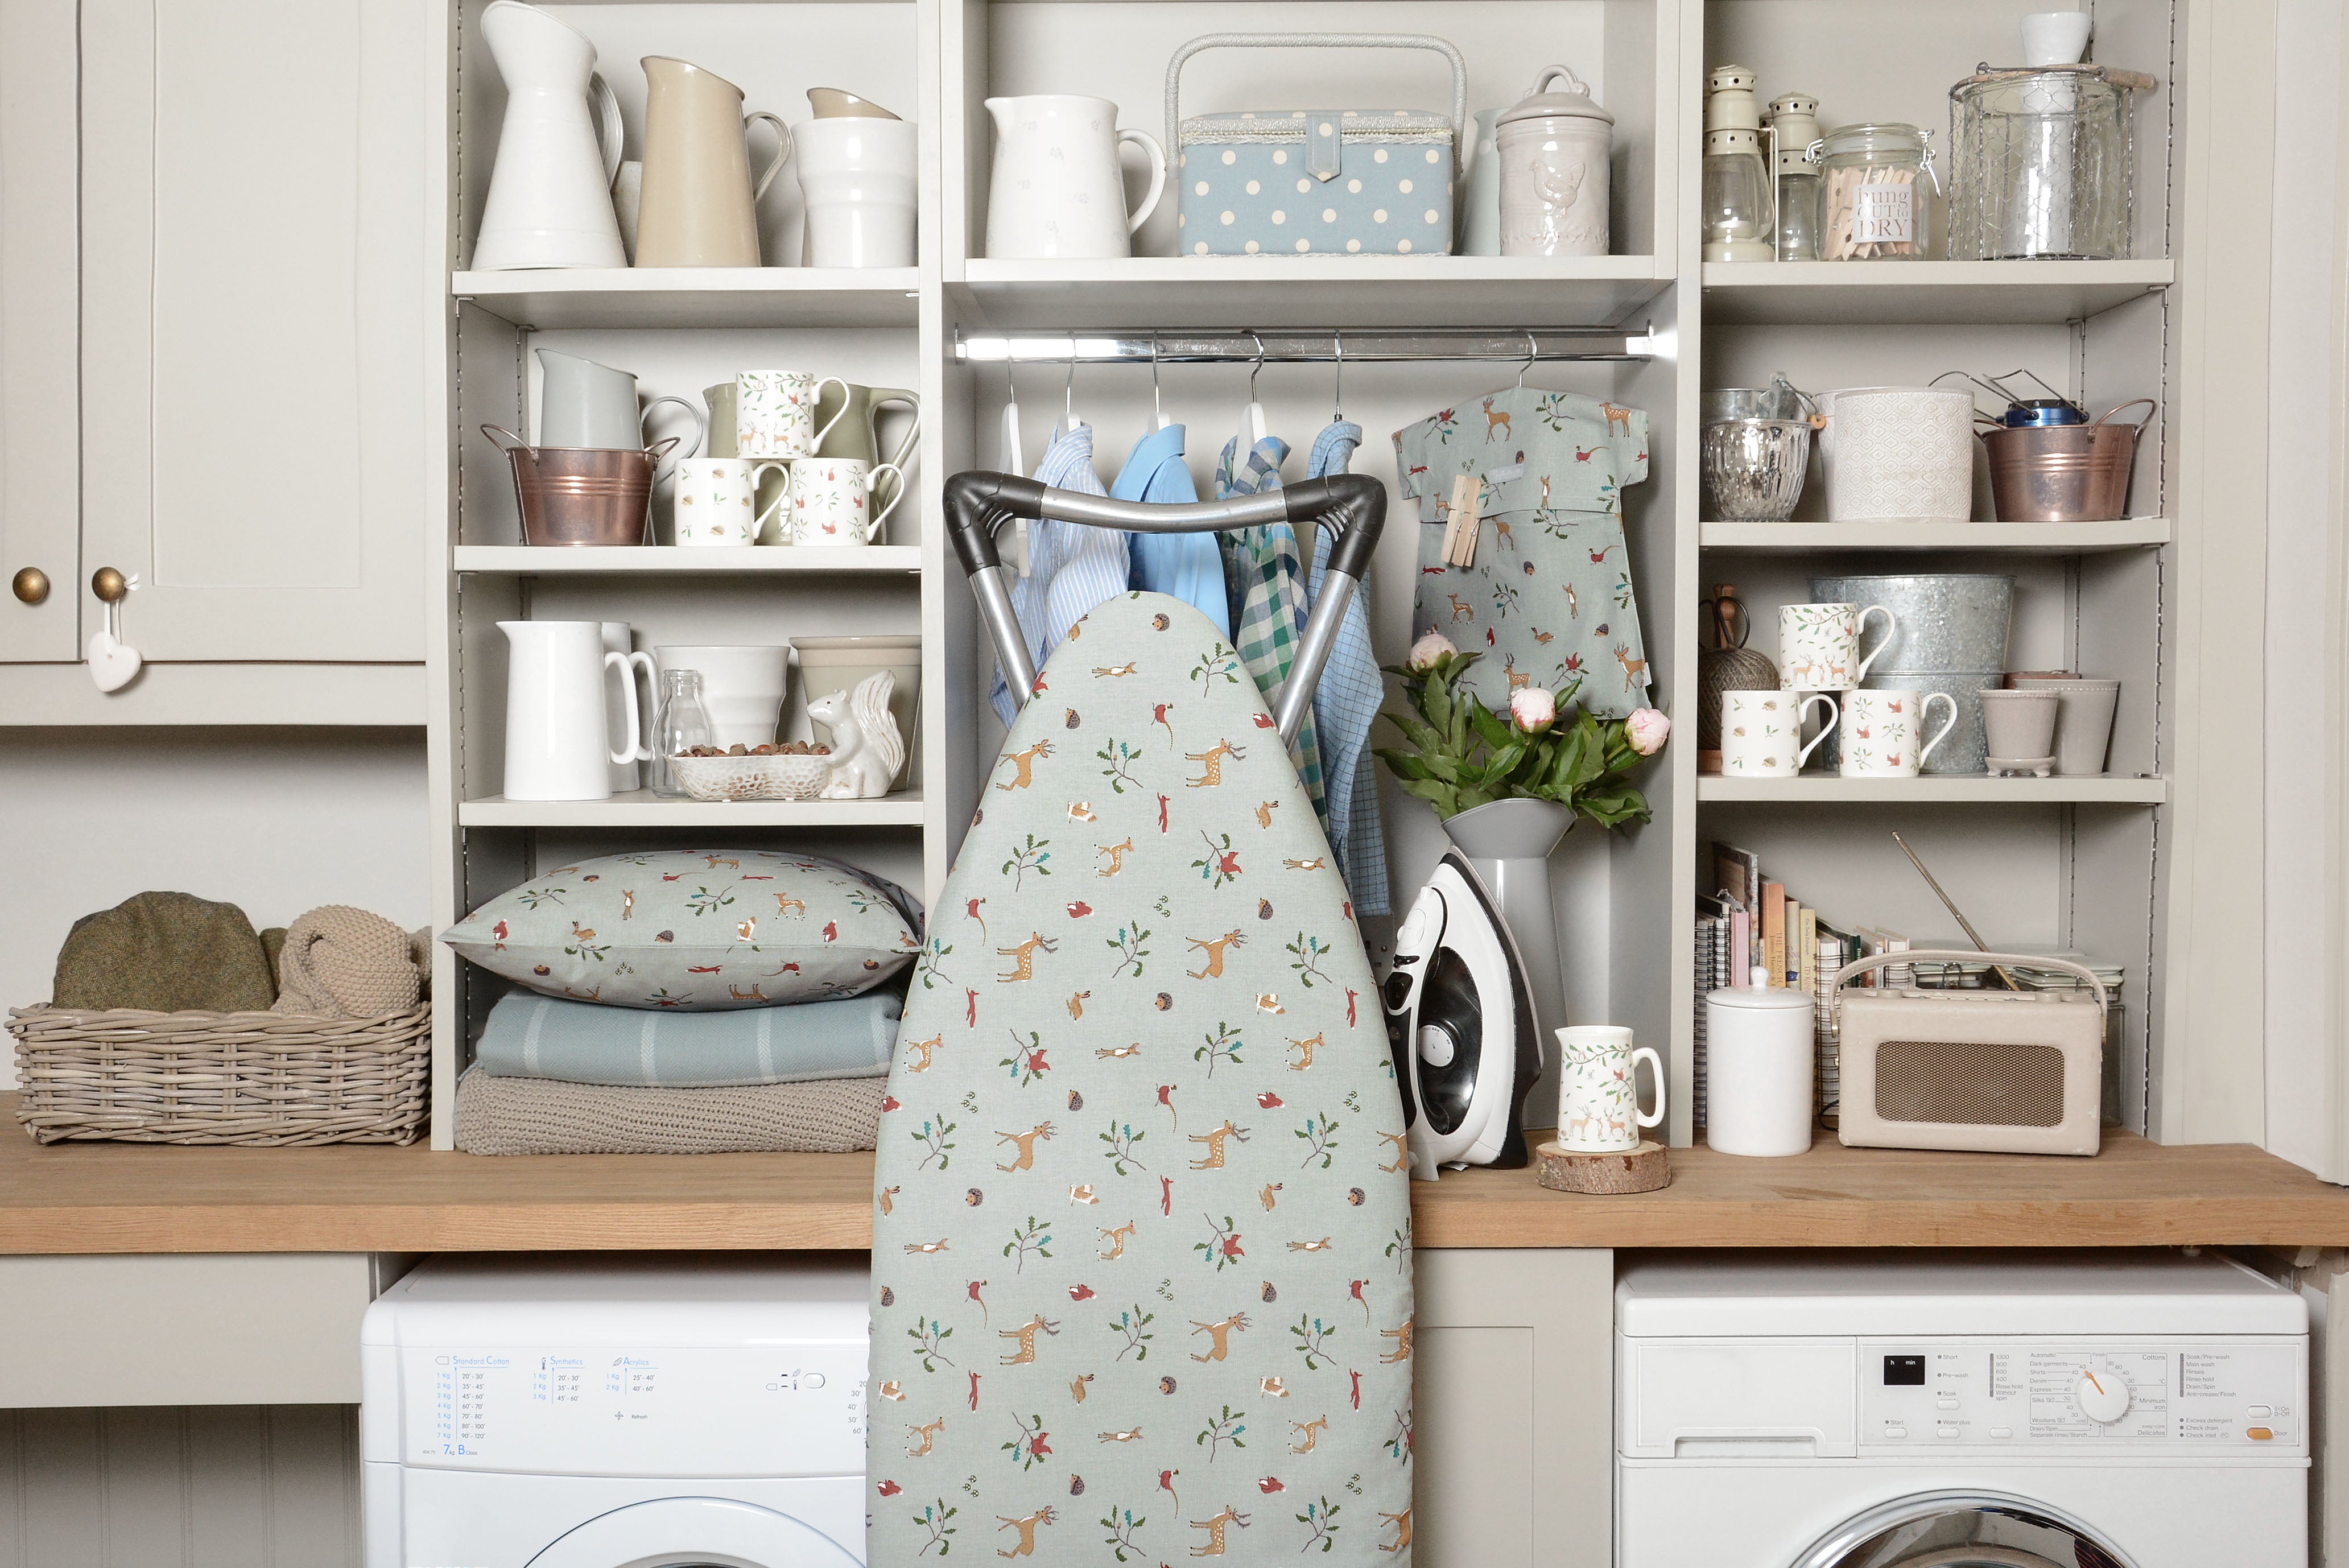 Utility room with ironing board and woodland homeware linens